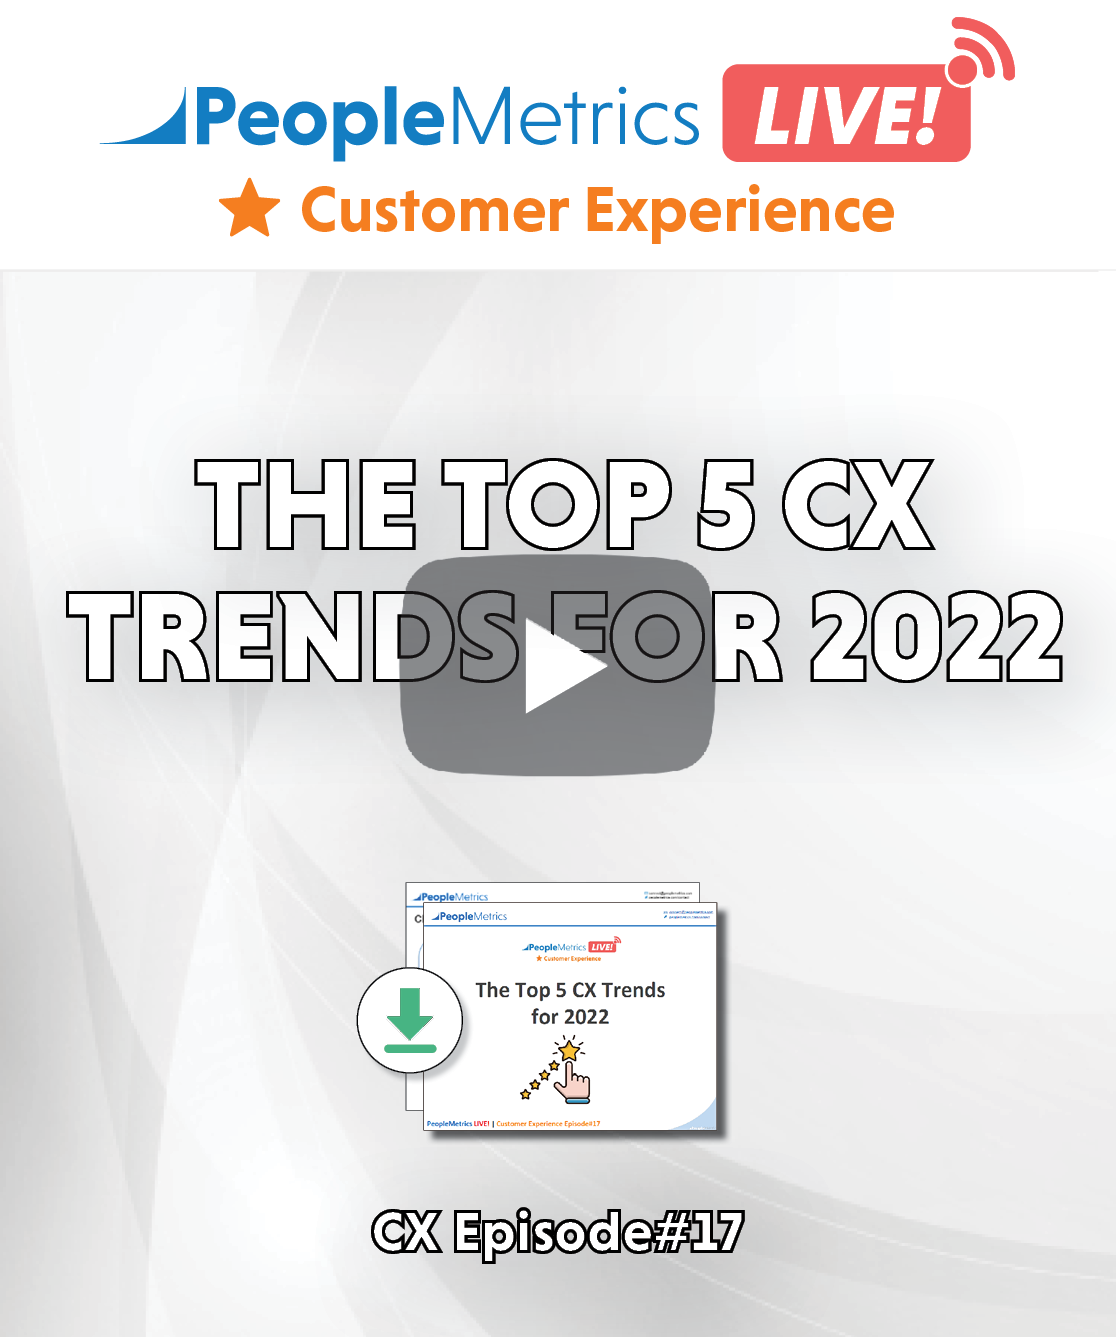 WATCH NOW: The Top 5 CX Trends for 2022